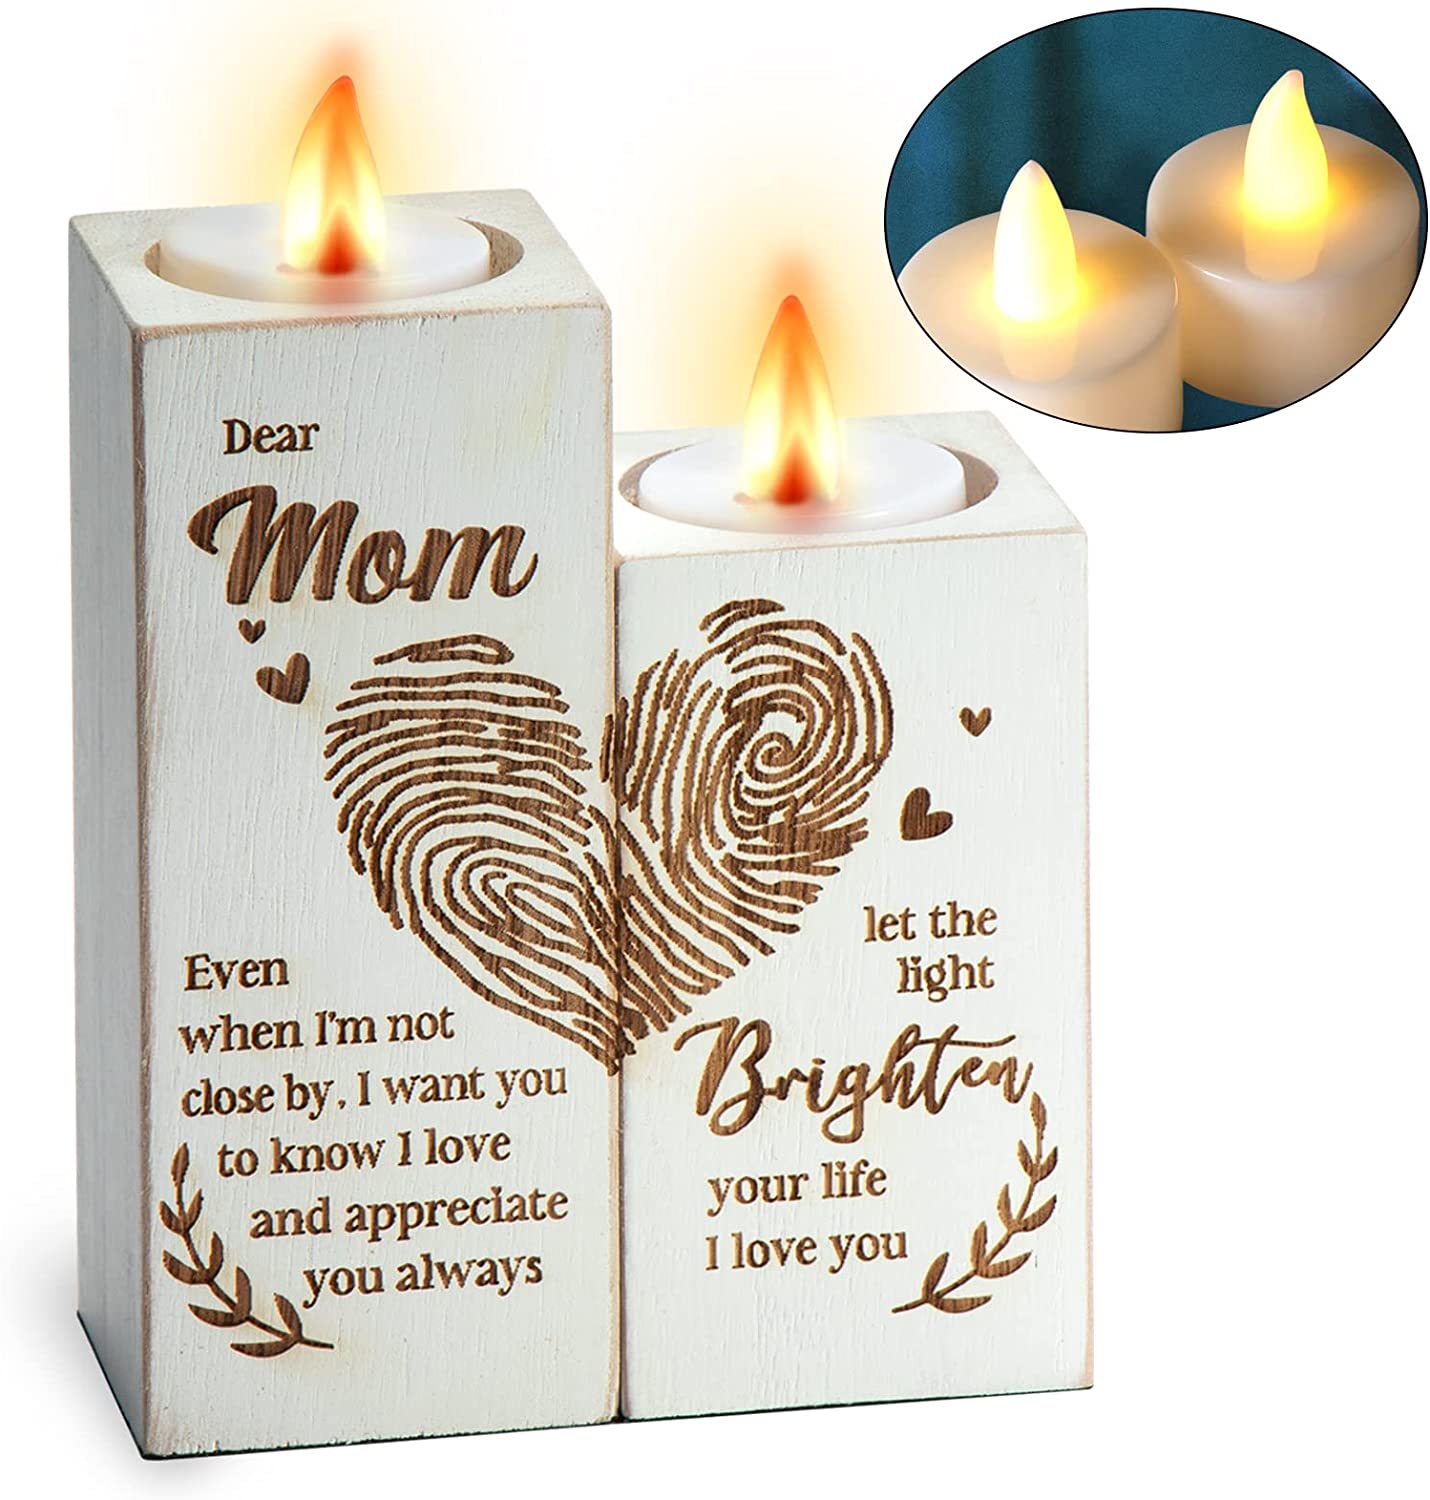 Gifts for Mom from Daughter, Meaningful Gifts for Mom, Rustic Farmhouse Style Tealight Candle Holder, for Mom's Birthday，Mother's Day, Christmas, Valentines Day，Fingerprint Heart Pattern